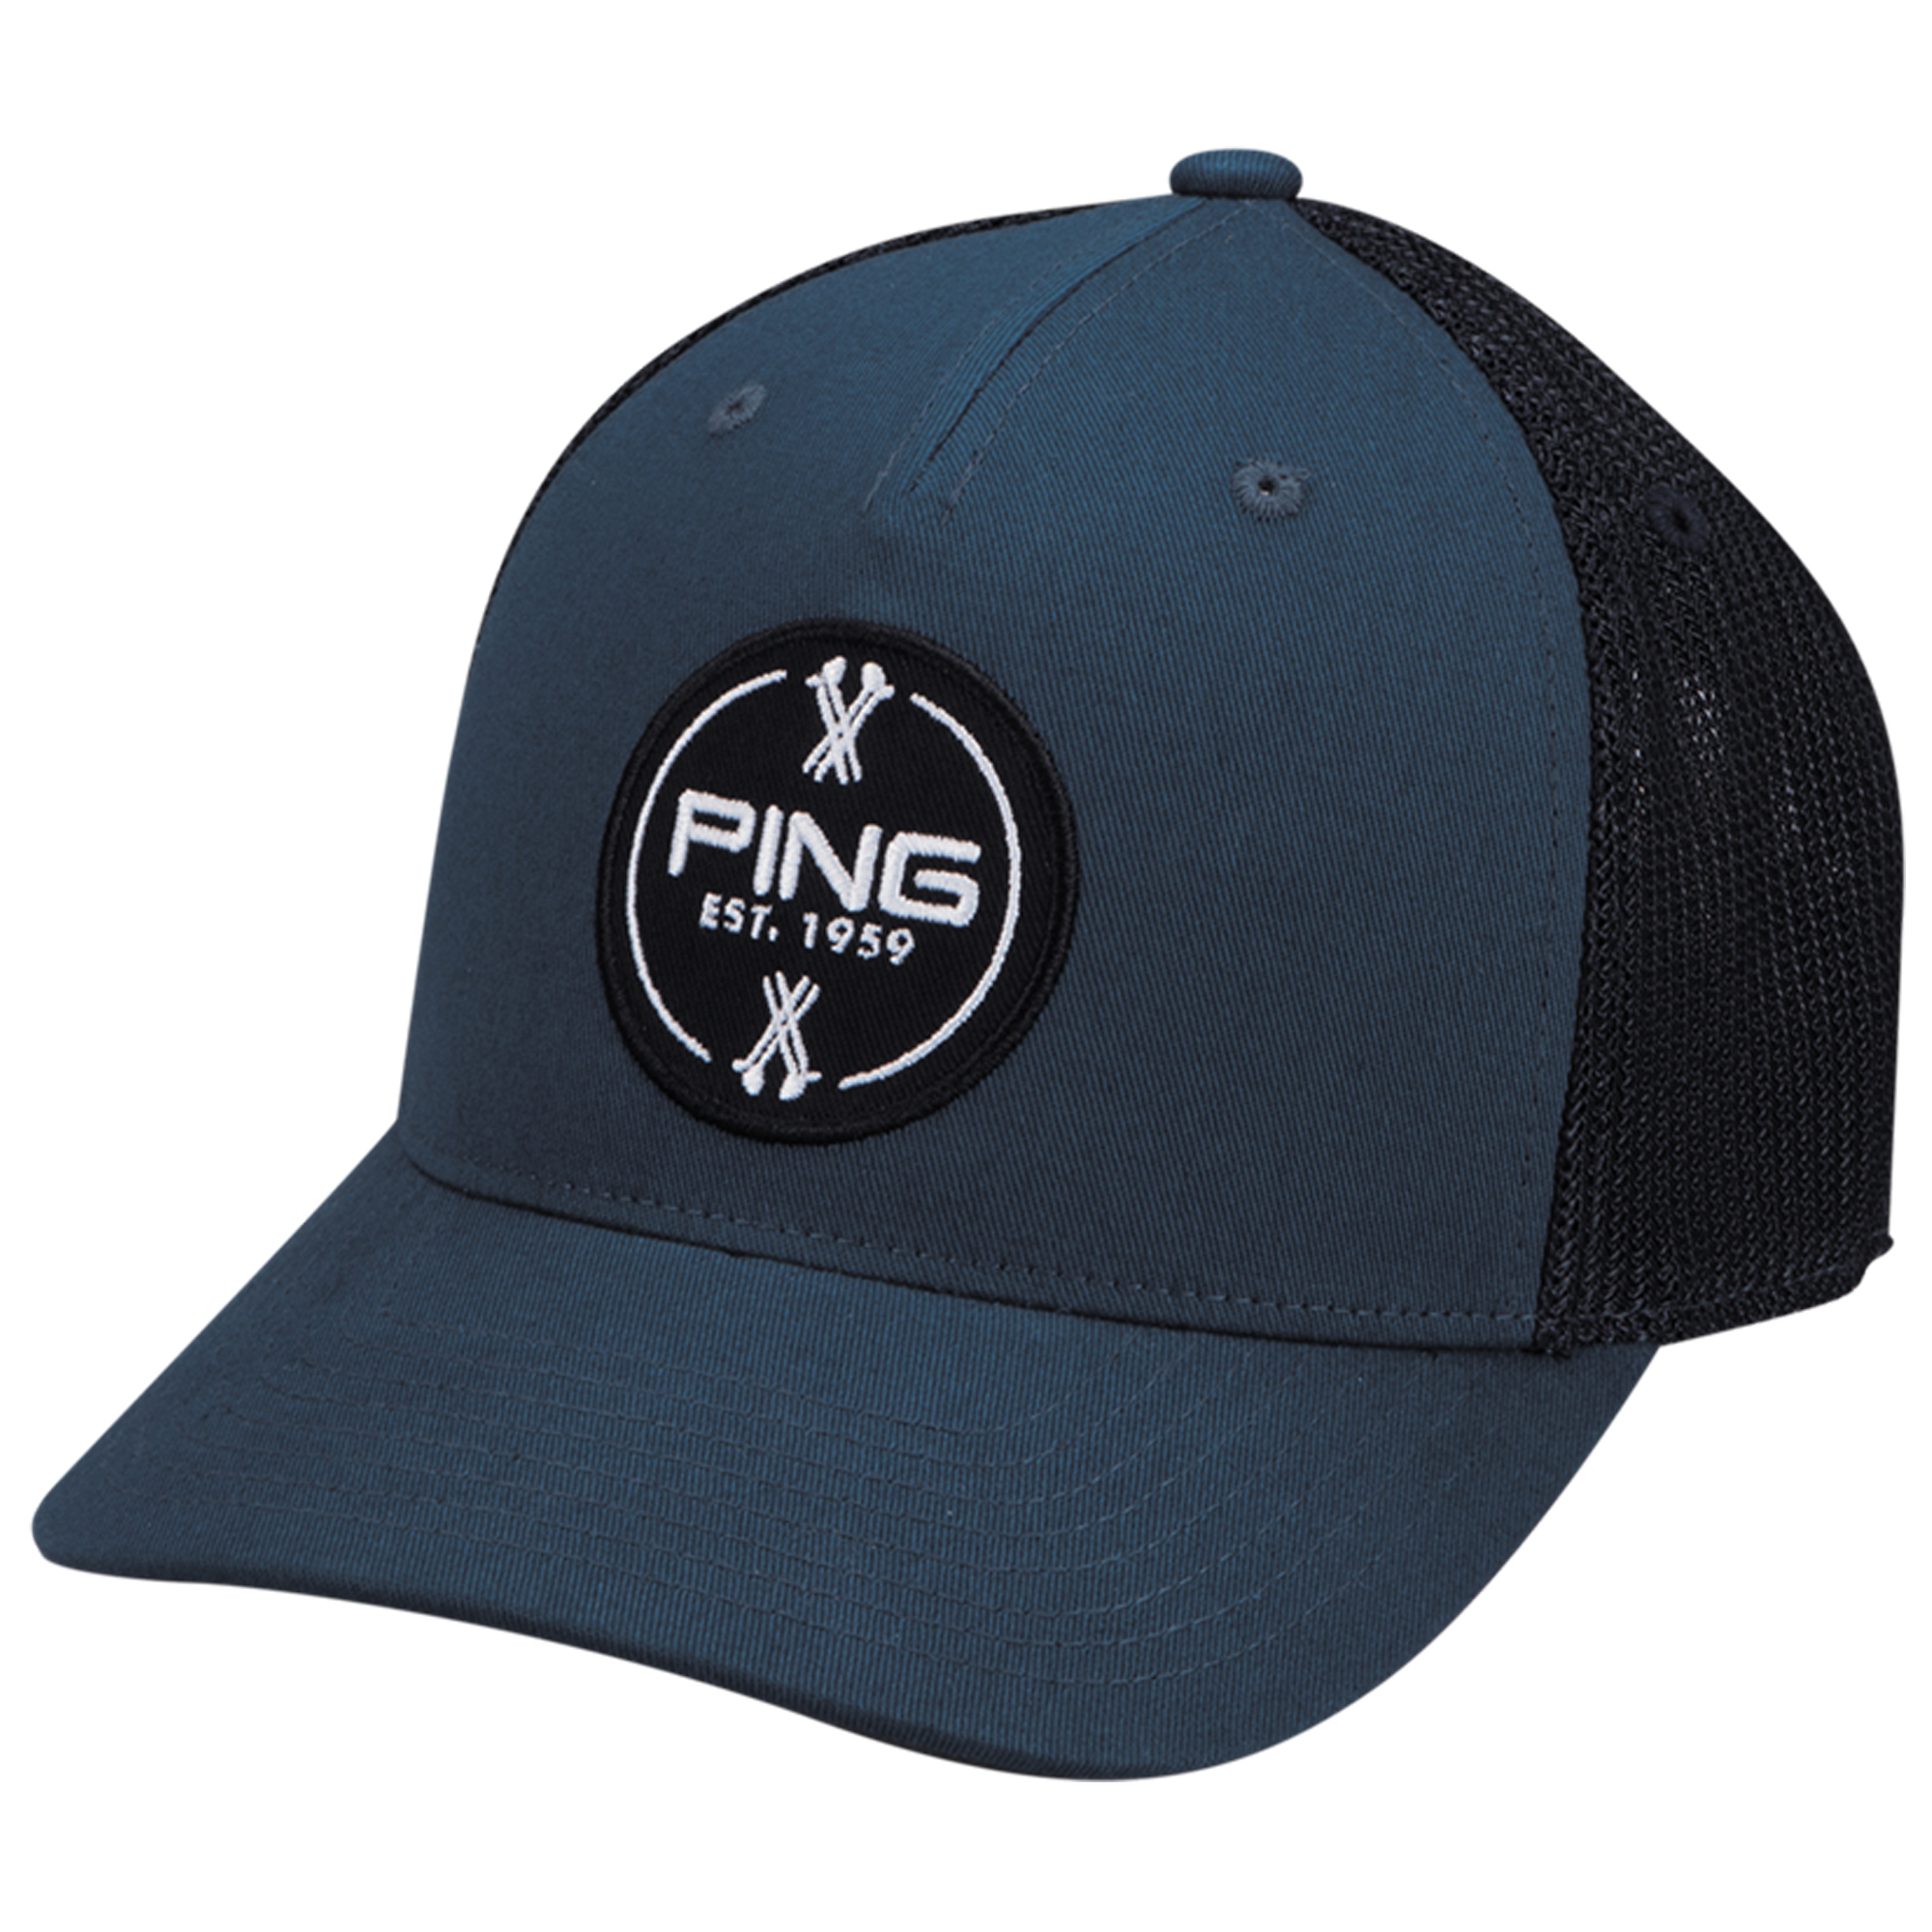 New 2015 Ping Patch Structured Hat/Cap COLOR: Denim SIZE: Adjustable | eBay